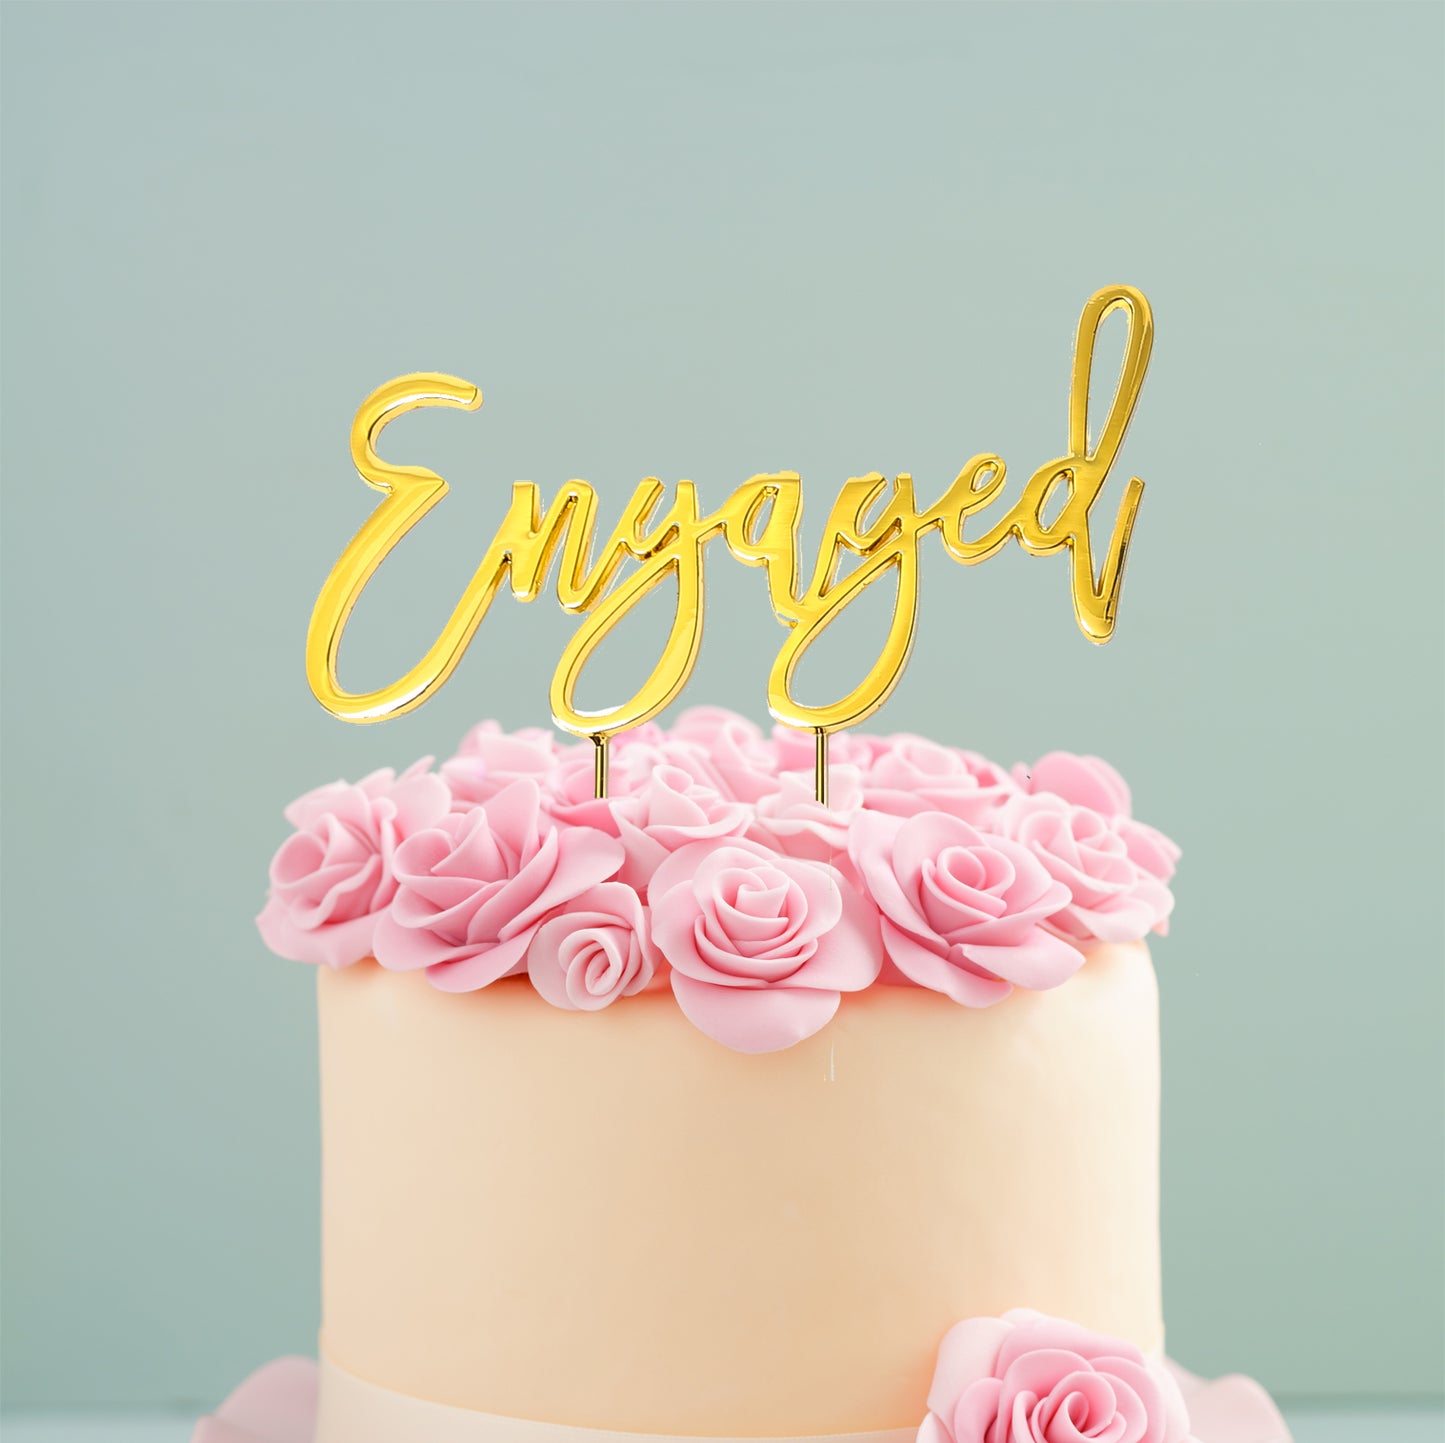 GOLD PLATED CAKE TOPPER - ENGAGED GOLD TOPPER